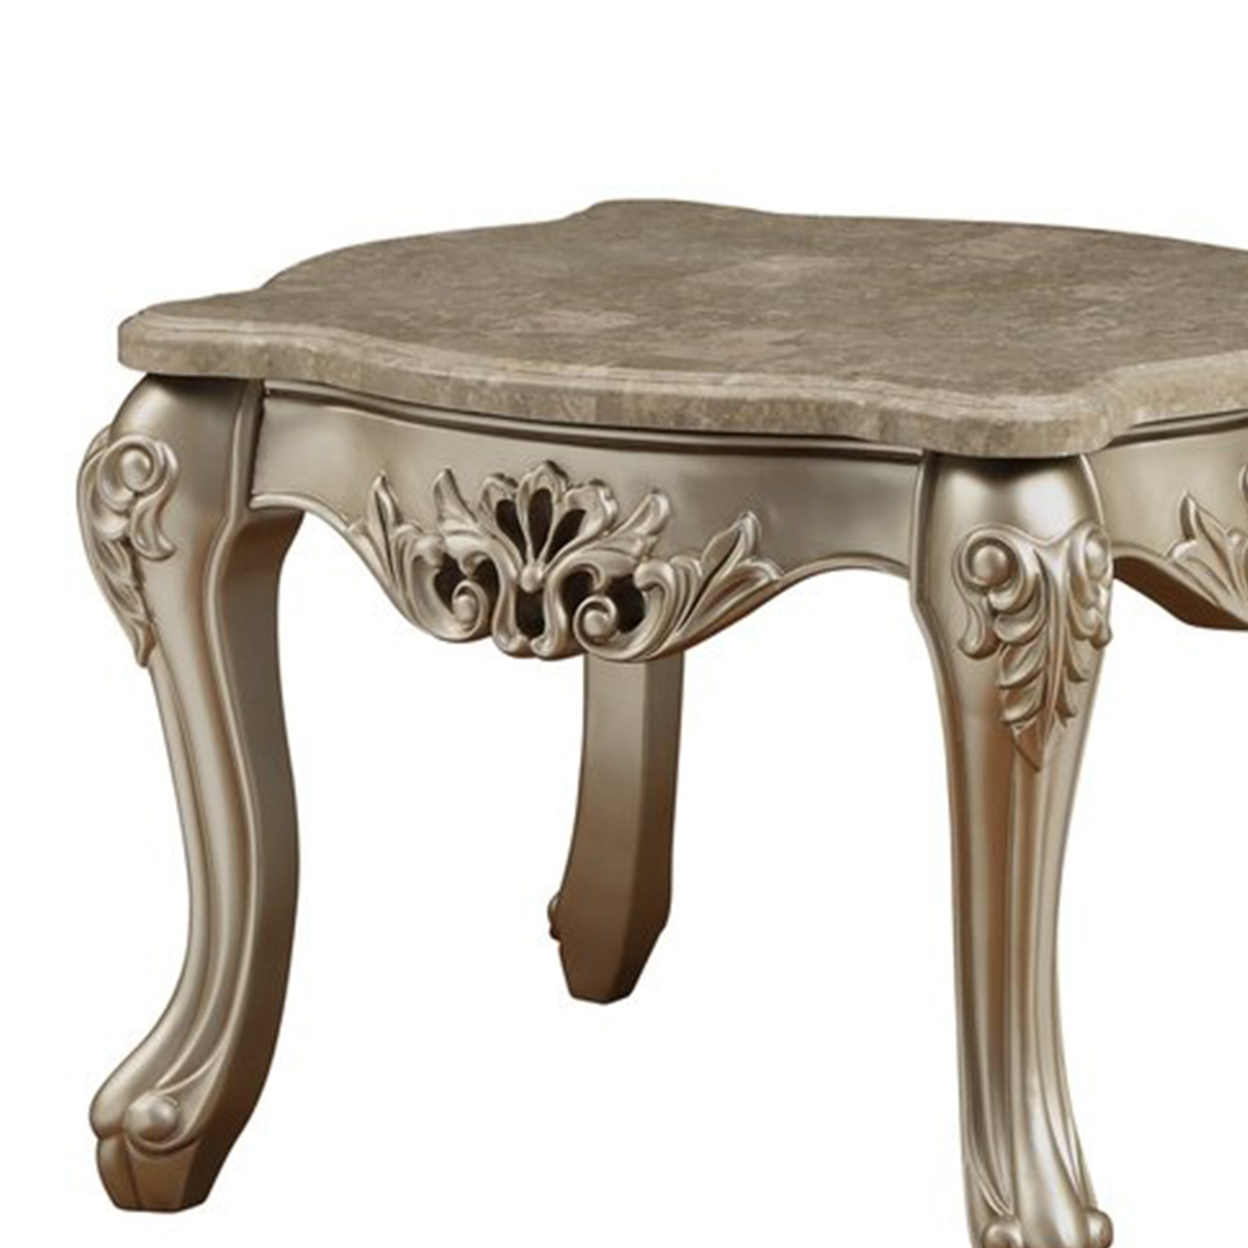 Marble Top Wooden End Table With Queen Anne Style Legs, Champagne Gold- Saltoro Sherpi